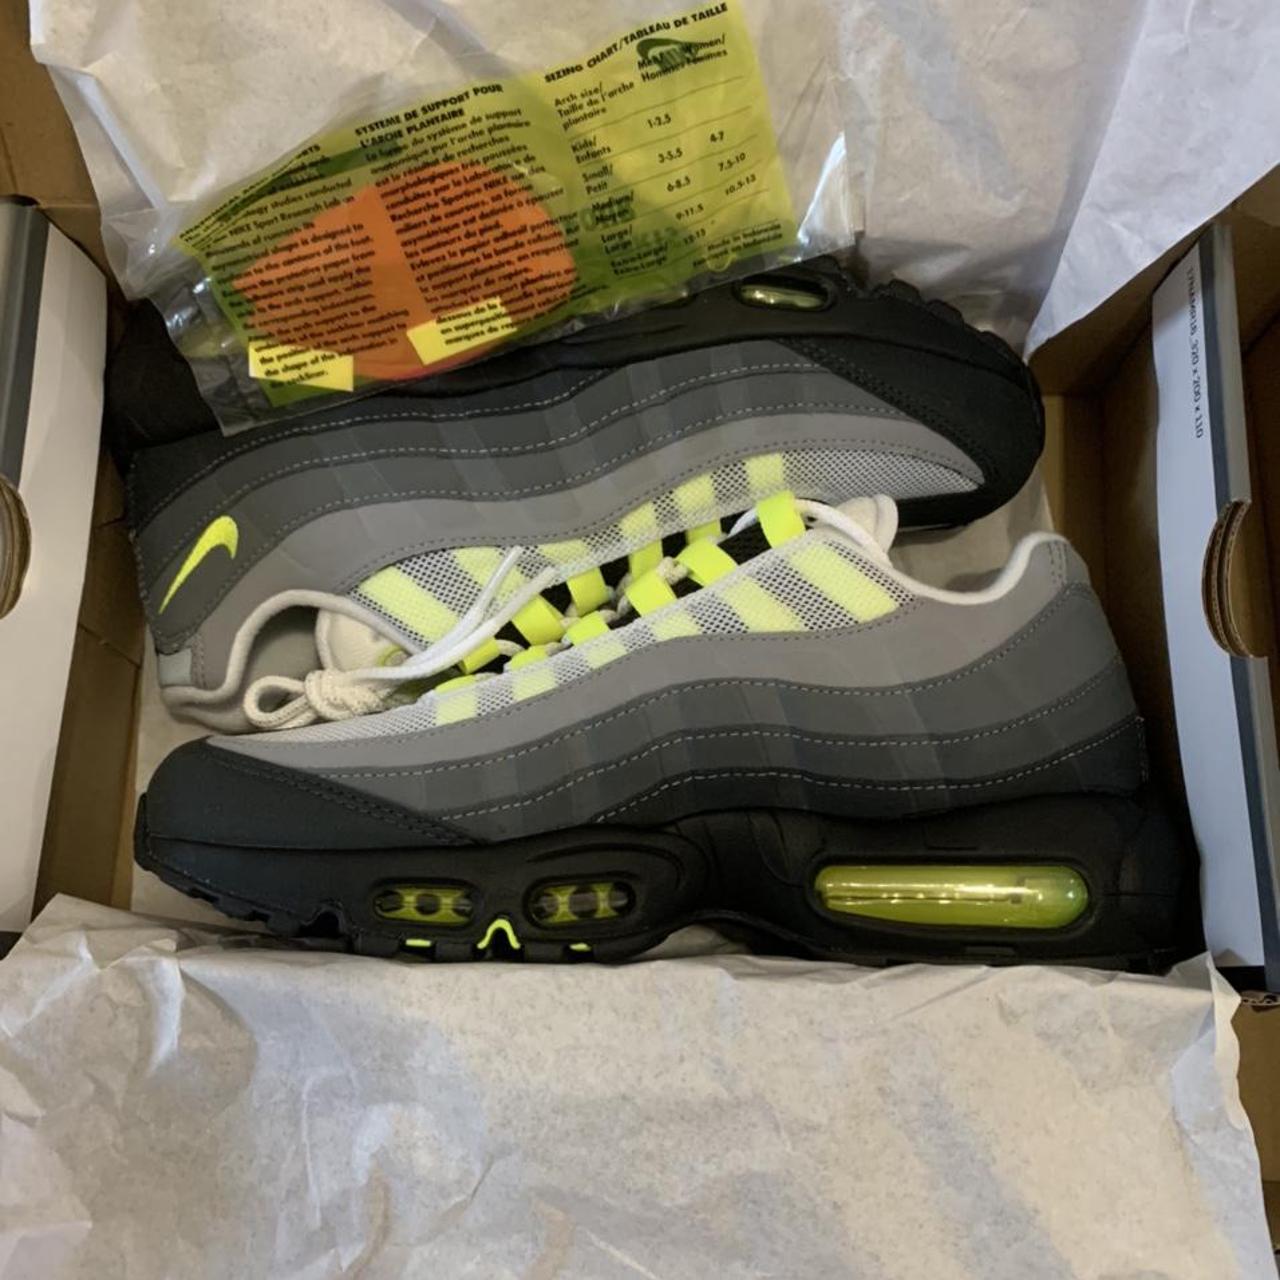 Nike air Max 95 neon OG Size 7 New with box - Depop